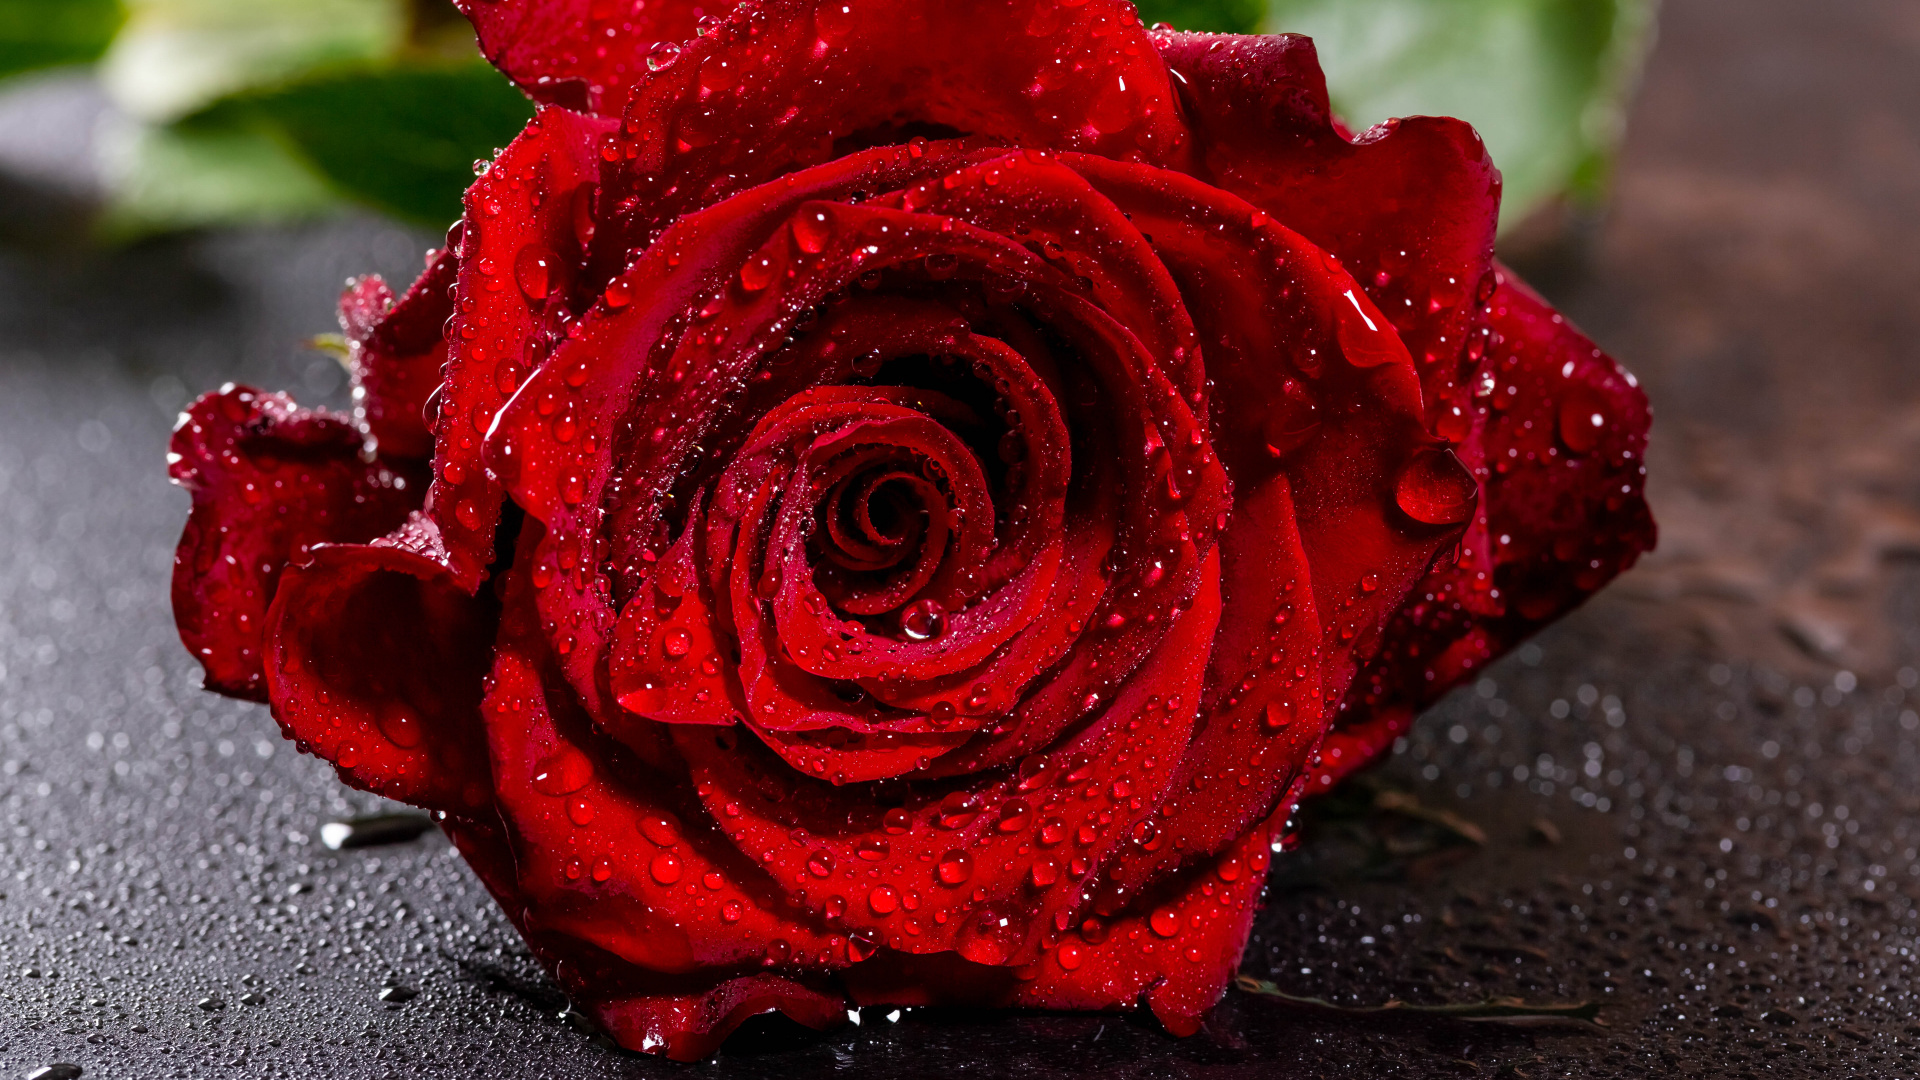 Red Rose on Black Surface. Wallpaper in 1920x1080 Resolution